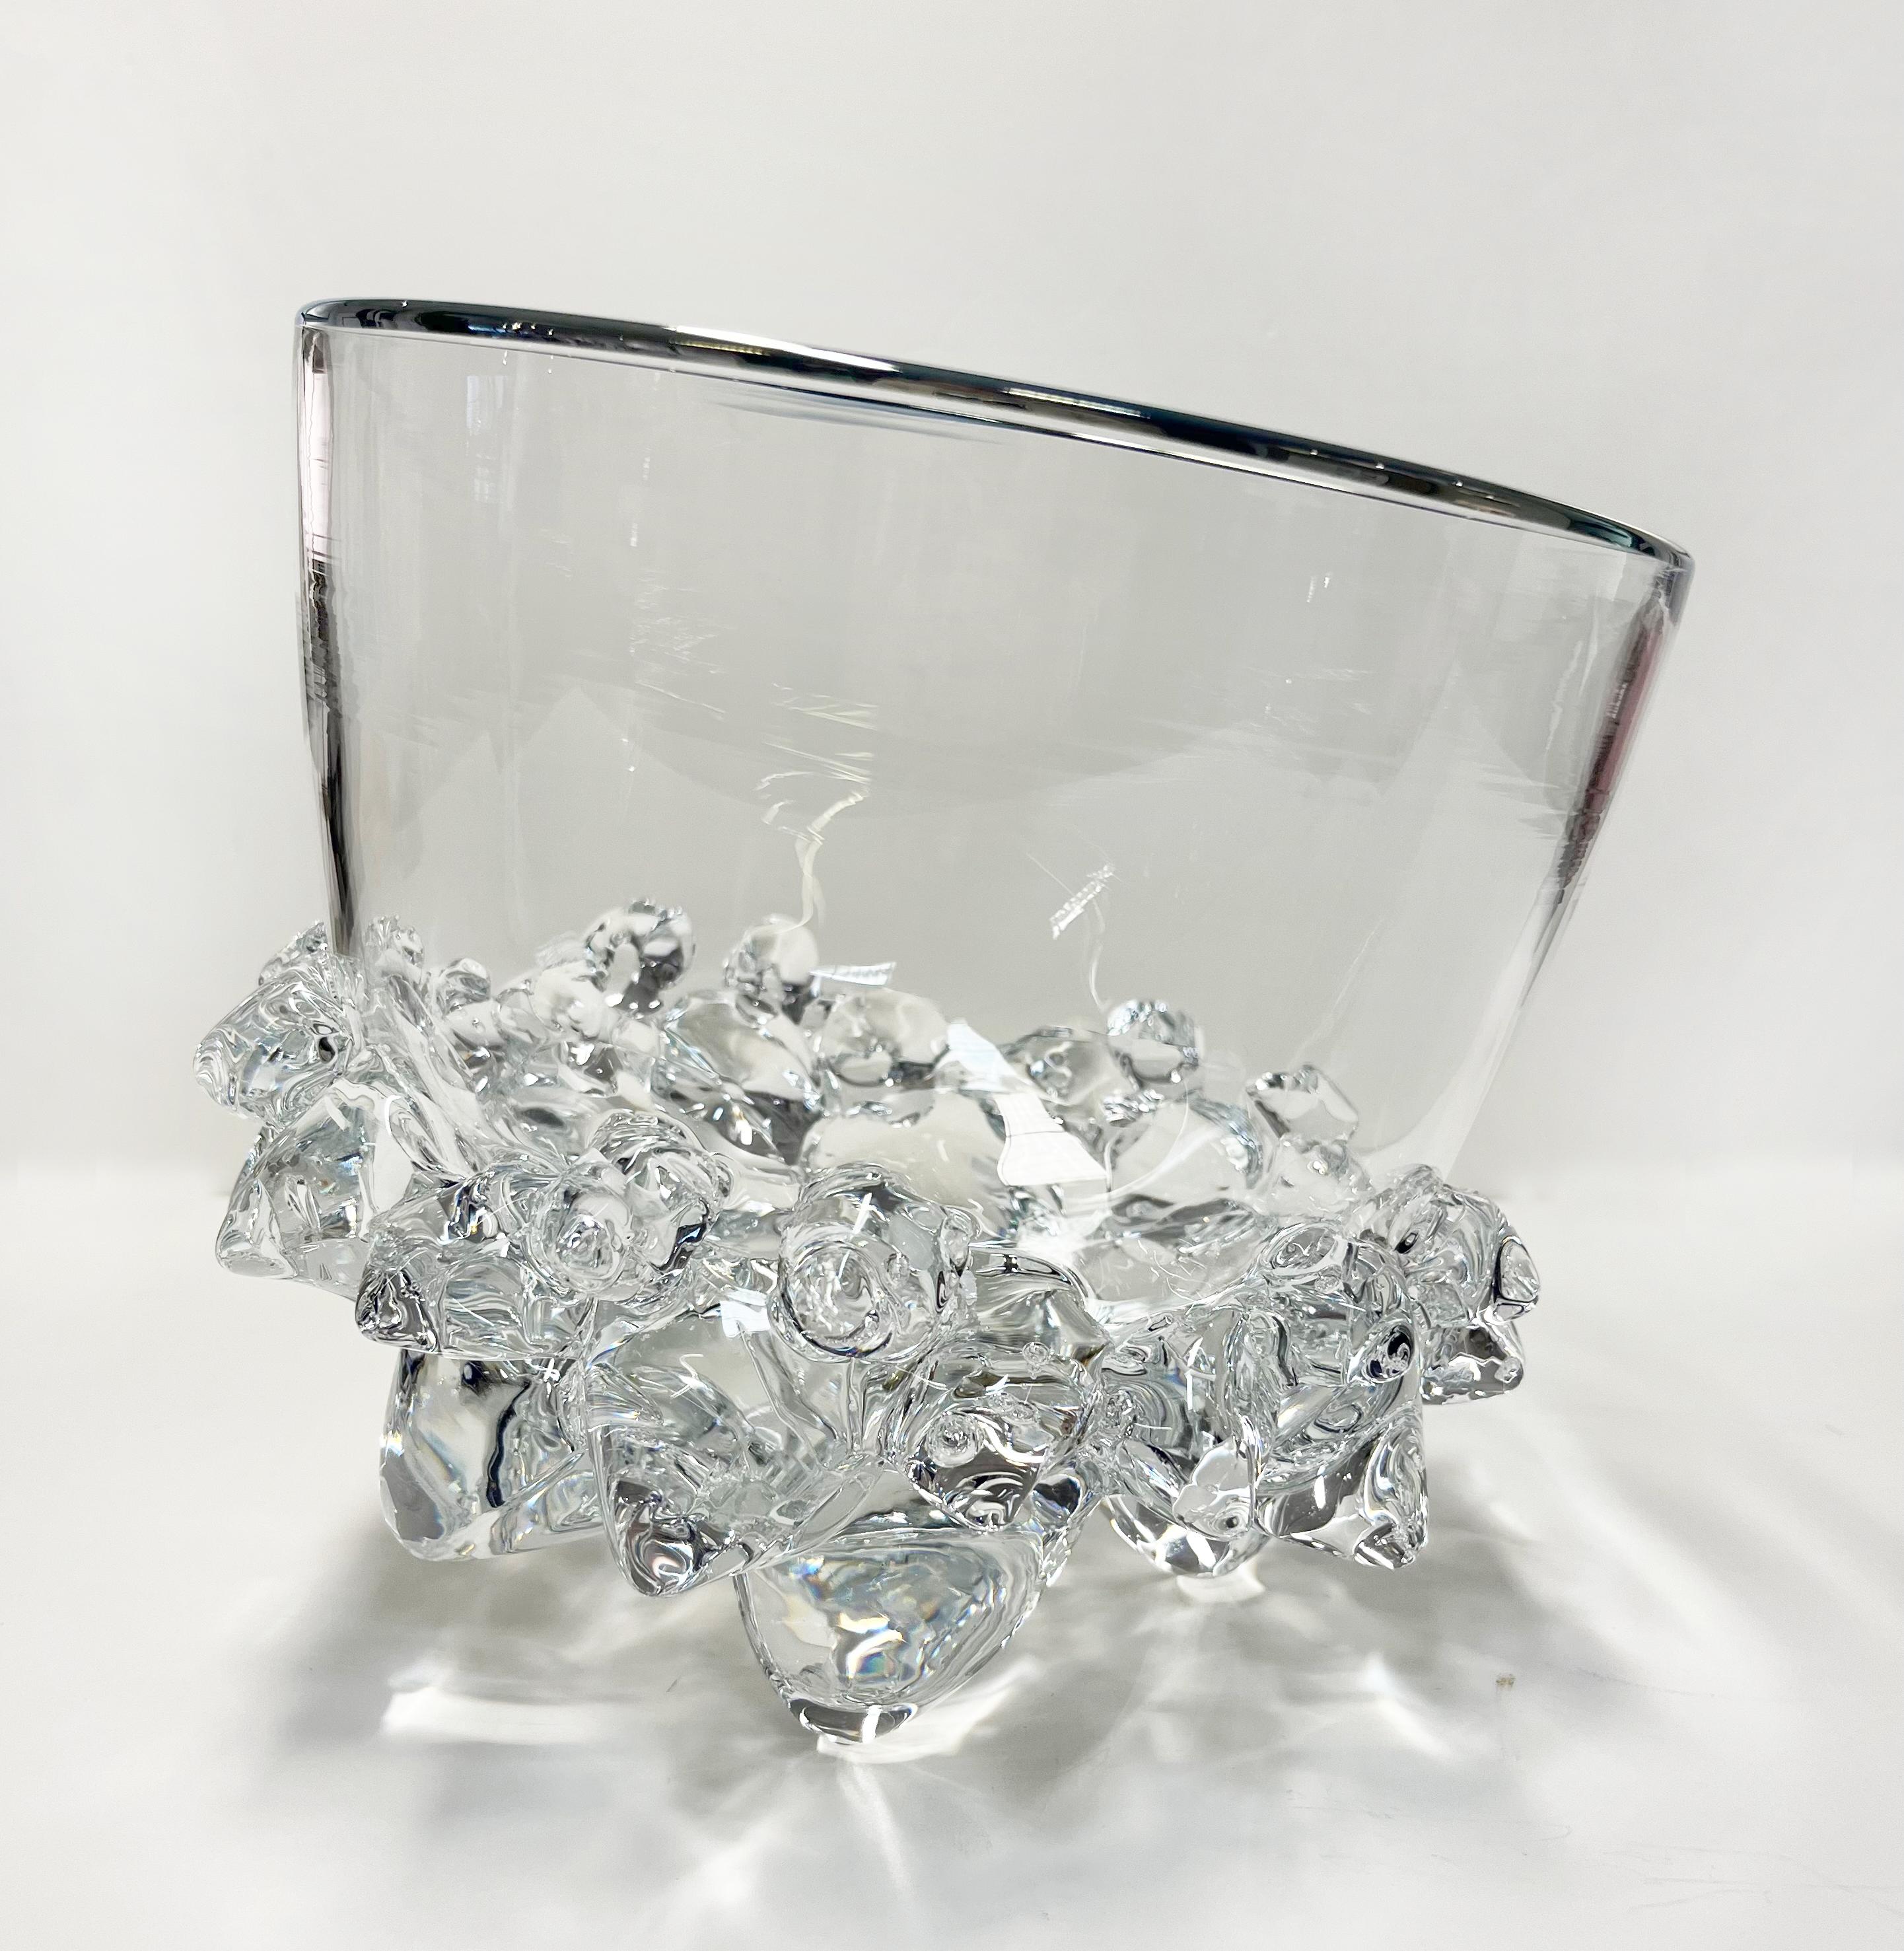 9" Glass Thorn Vessel, Crystal Clear, art glass bowl - Art by Andrew Madvin